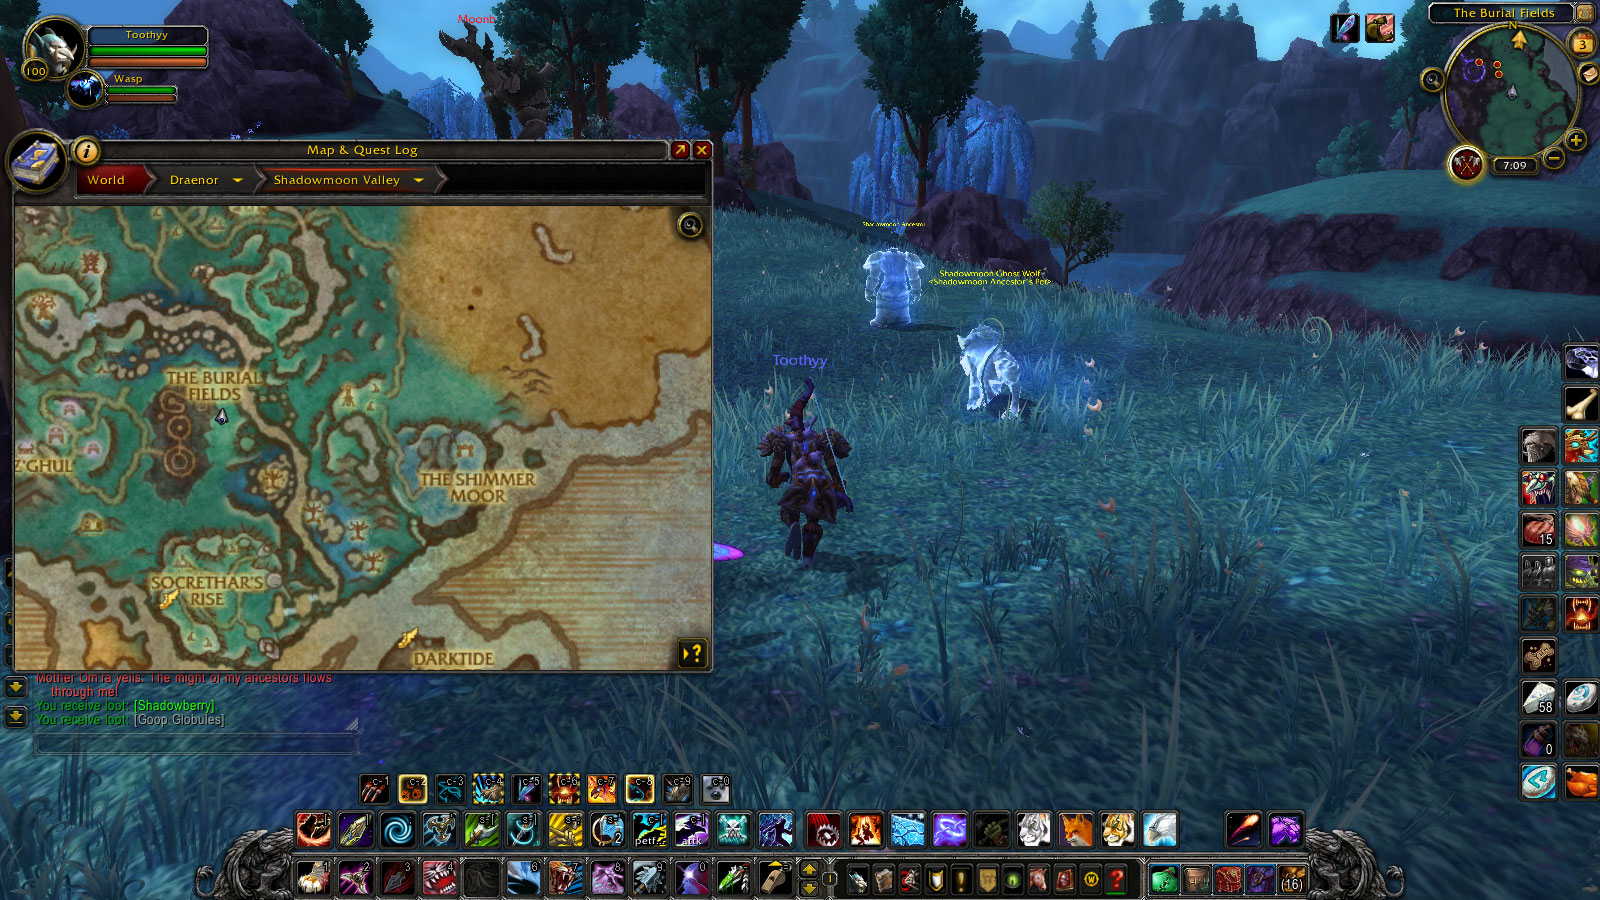 Location of spirit orcs with spirit wolves. There are only a few of them scattered about.